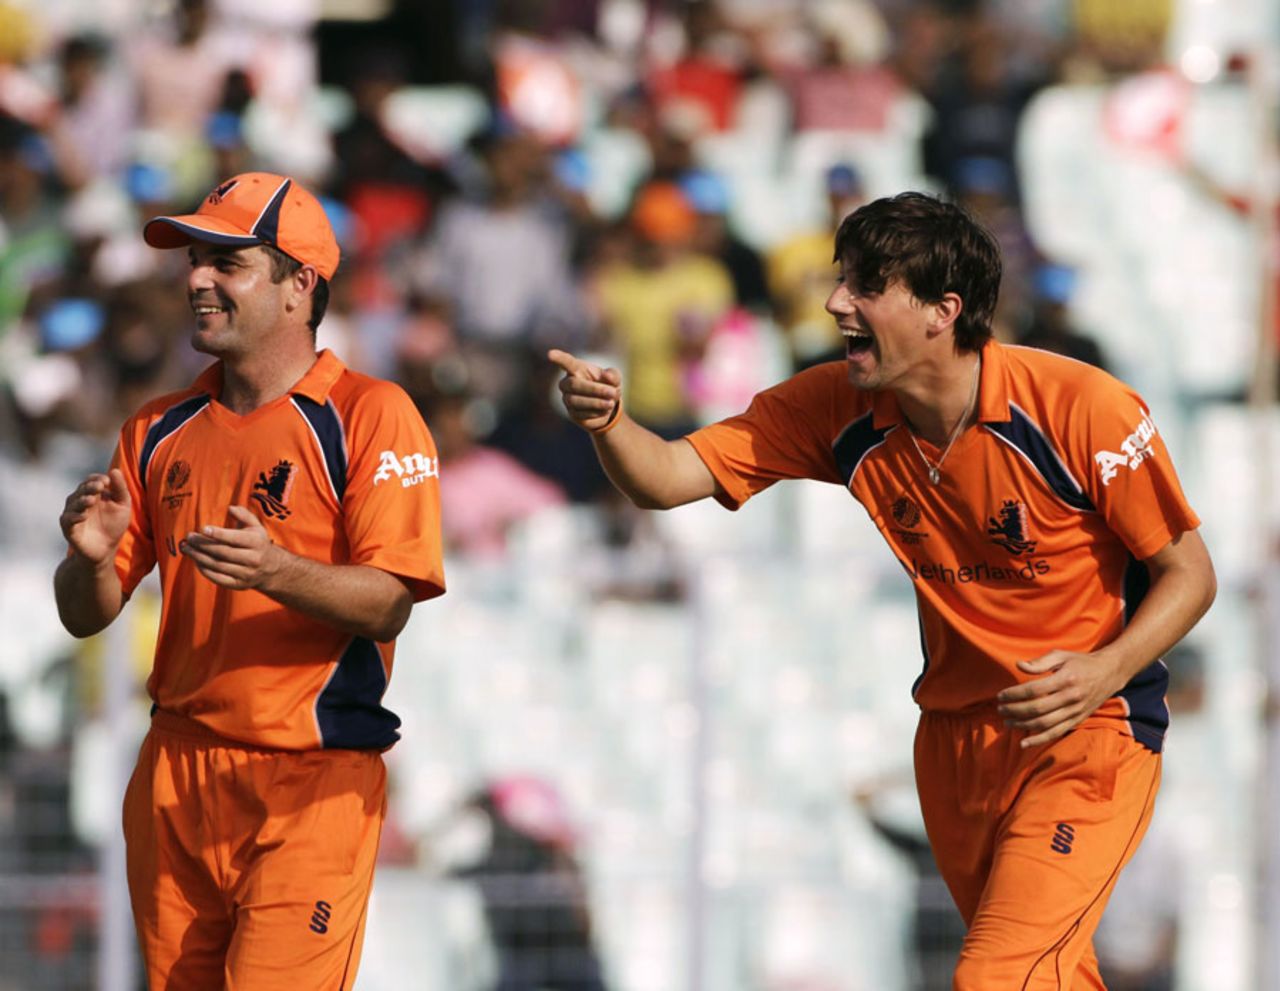 Pieter Seelaar has a laugh after dismissing Paul Stirling, Ireland v Netherlands, World Cup 2011, Group B, March 18, 2011